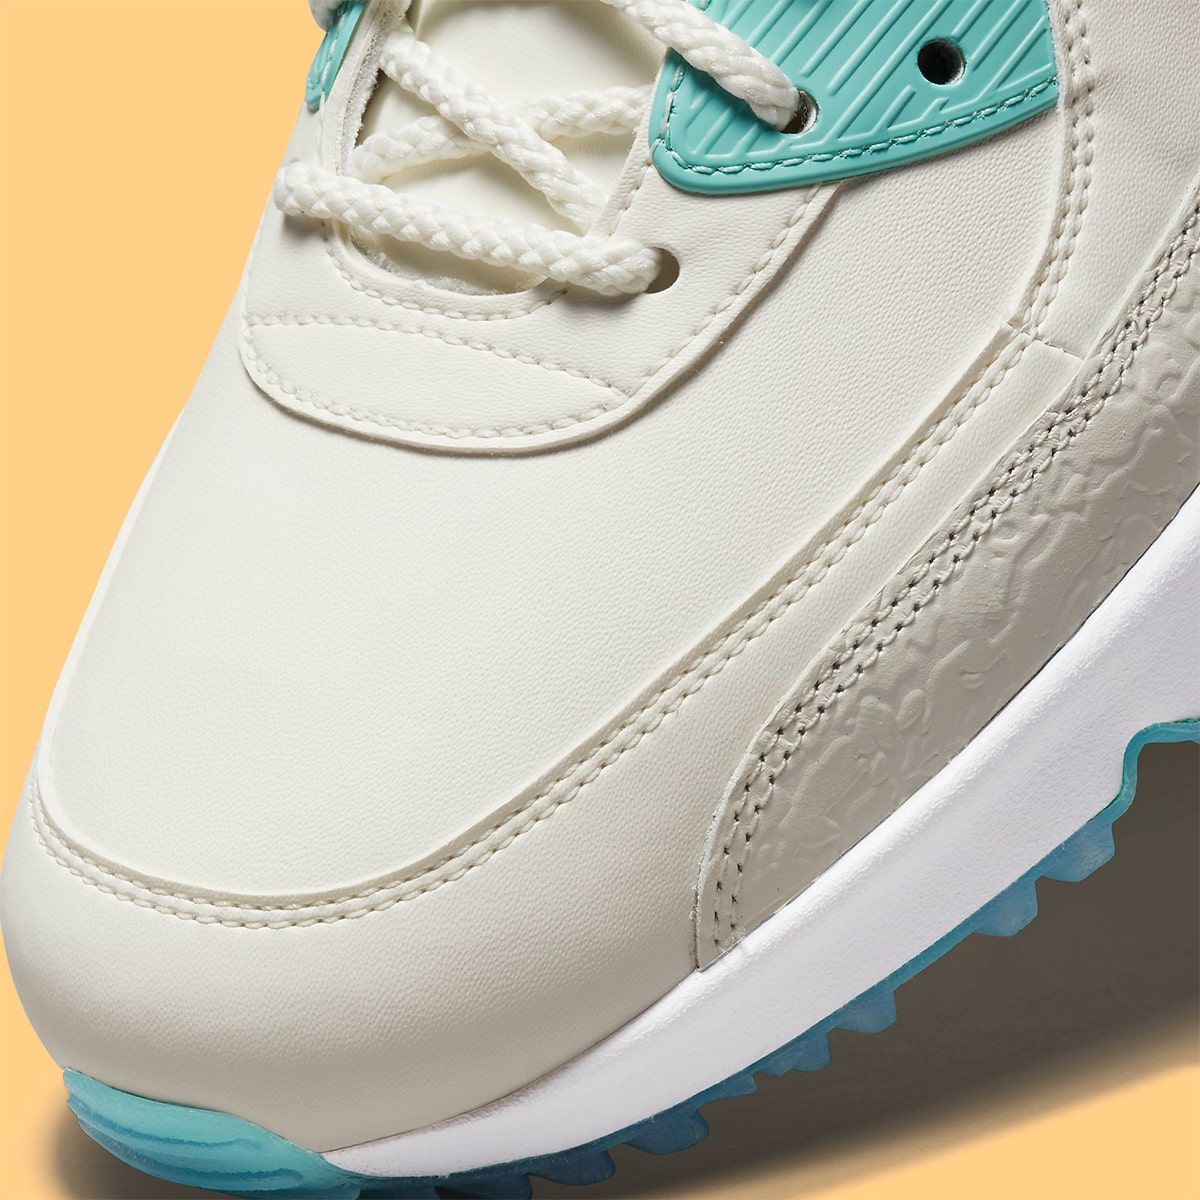 Nike Air Max 90 Golf Gets a Tropical Twist for Summer | HOUSE OF HEAT